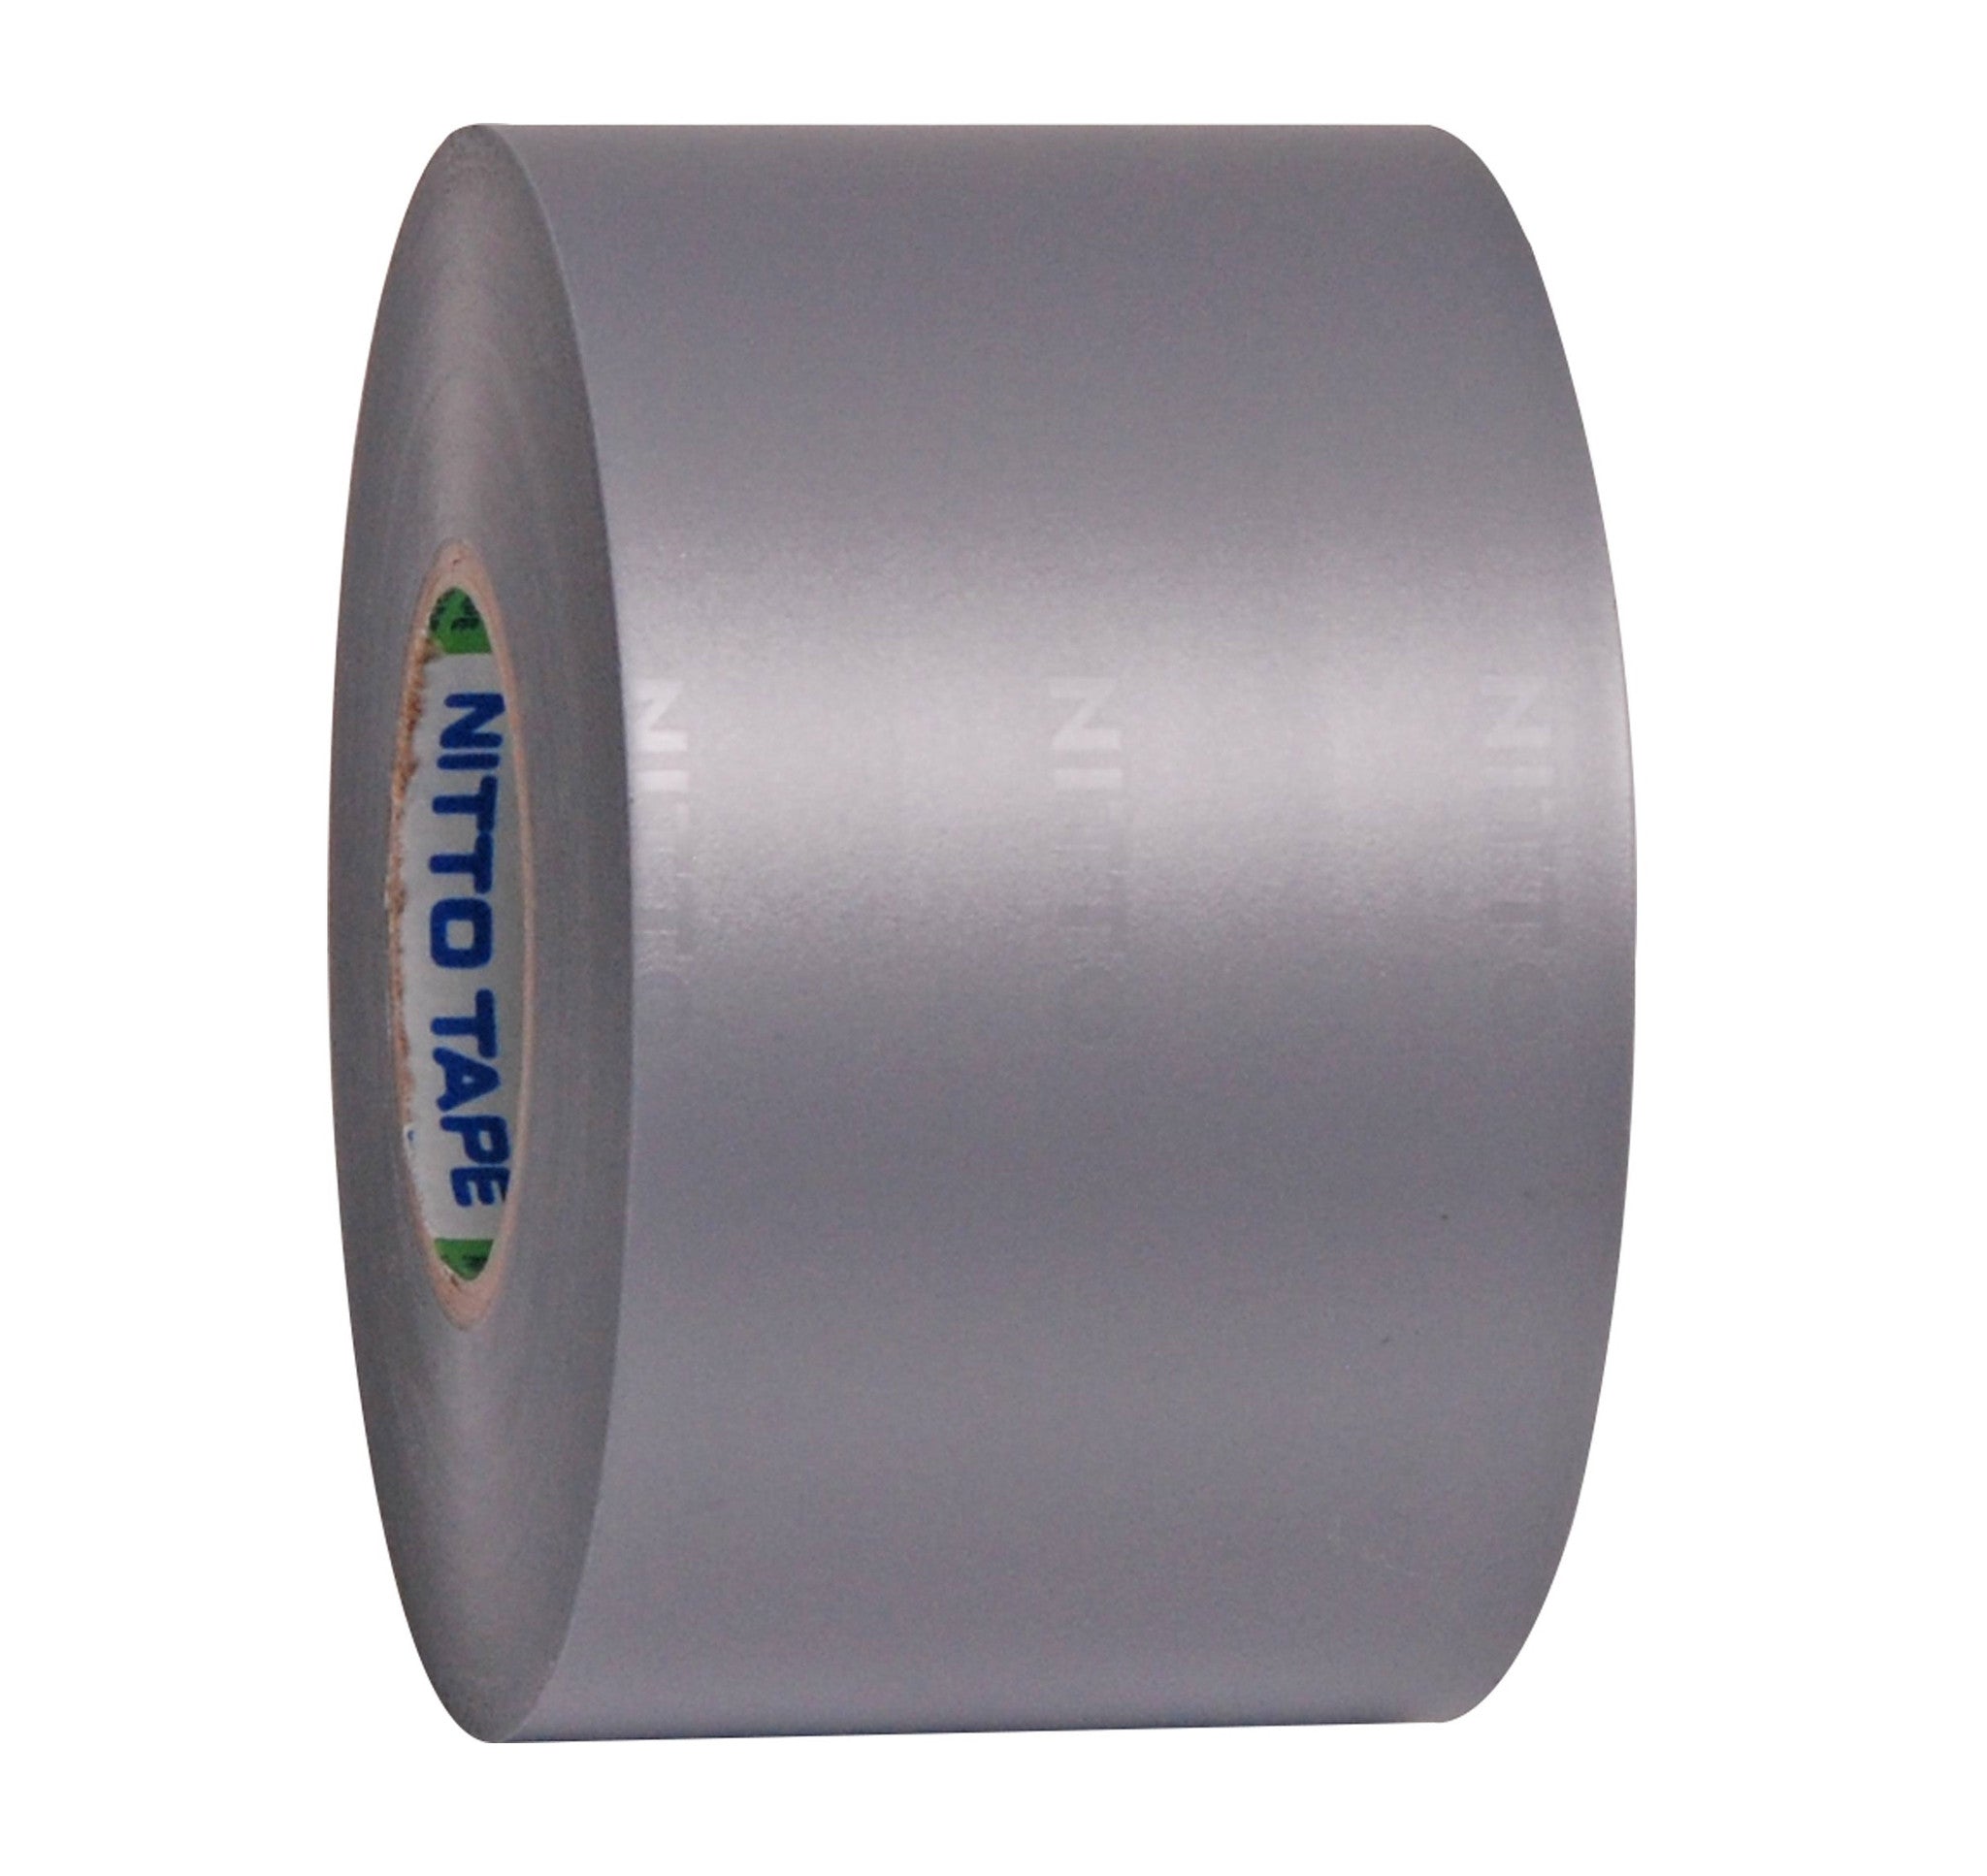 Nitto Nitto 48mm x 30M Duct Tape - Silver - BNR Industrial